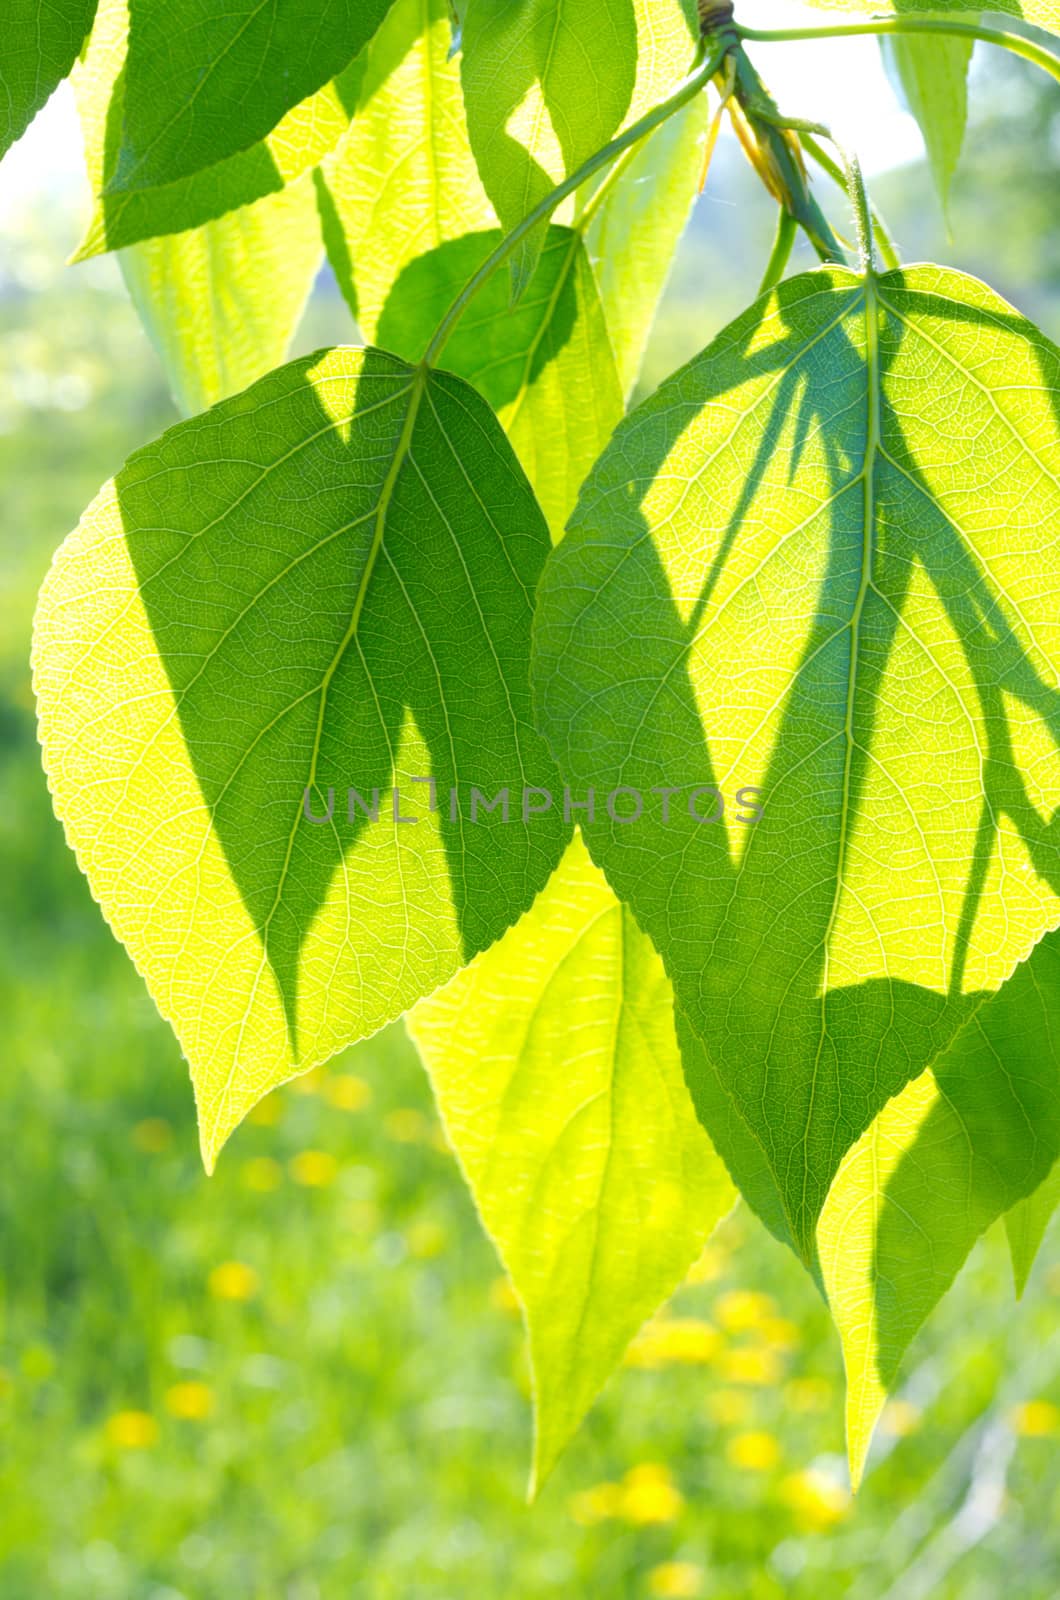 Green poplar leaves on floral background by rbv